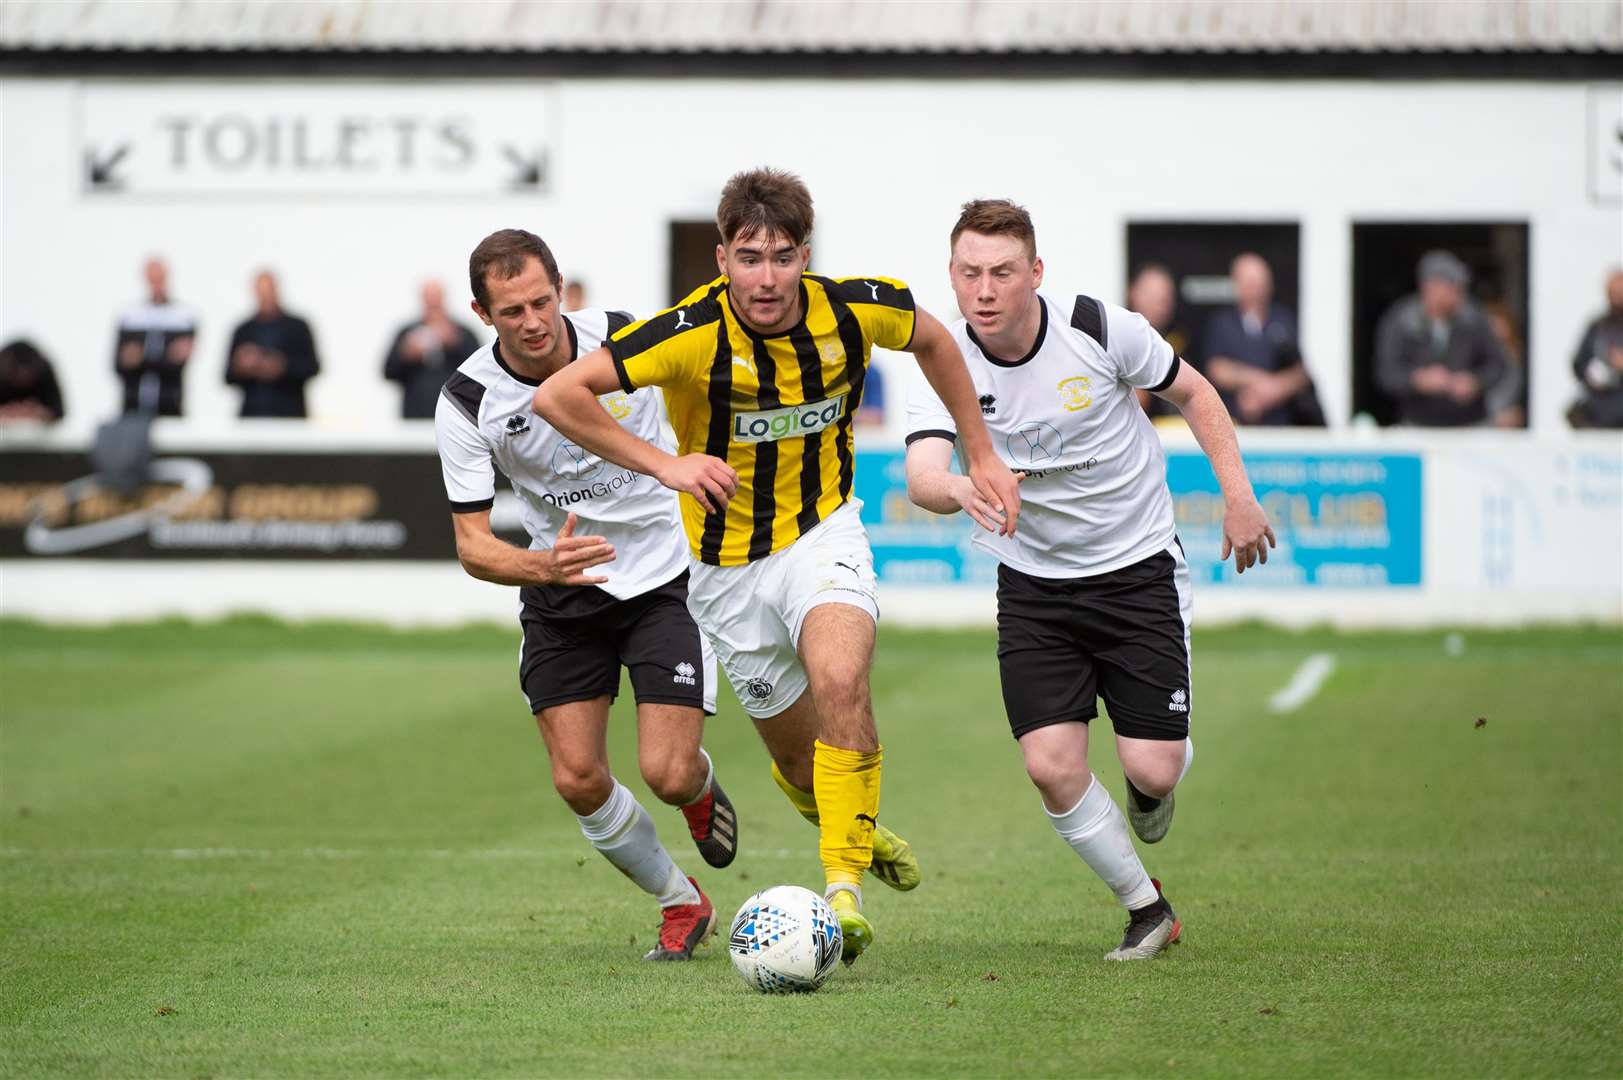 The status of Nairn County's home match against Clachnacuddin tomorrow is still unclear, and it could have a knock-on effect on Nairn's season. Picture: Callum Mackay